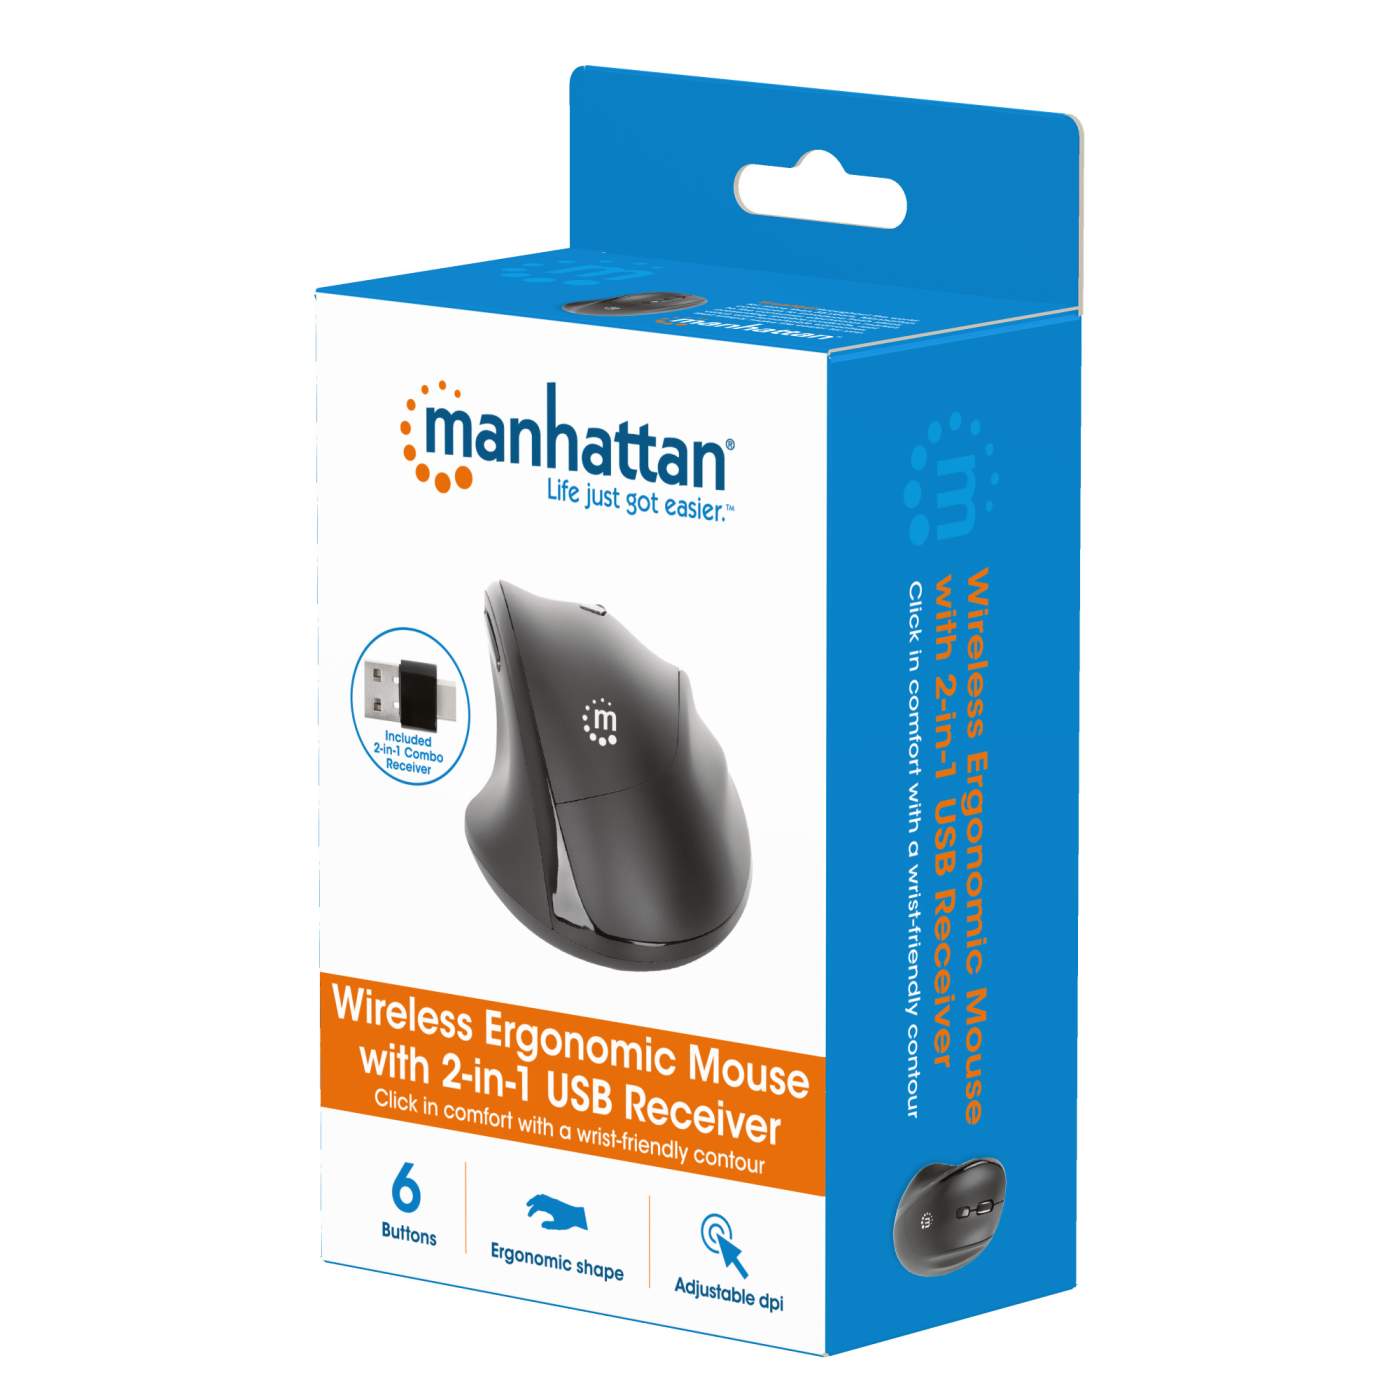 Wireless Ergonomic Mouse with 2-in-1 USB Receiver Packaging Image 2